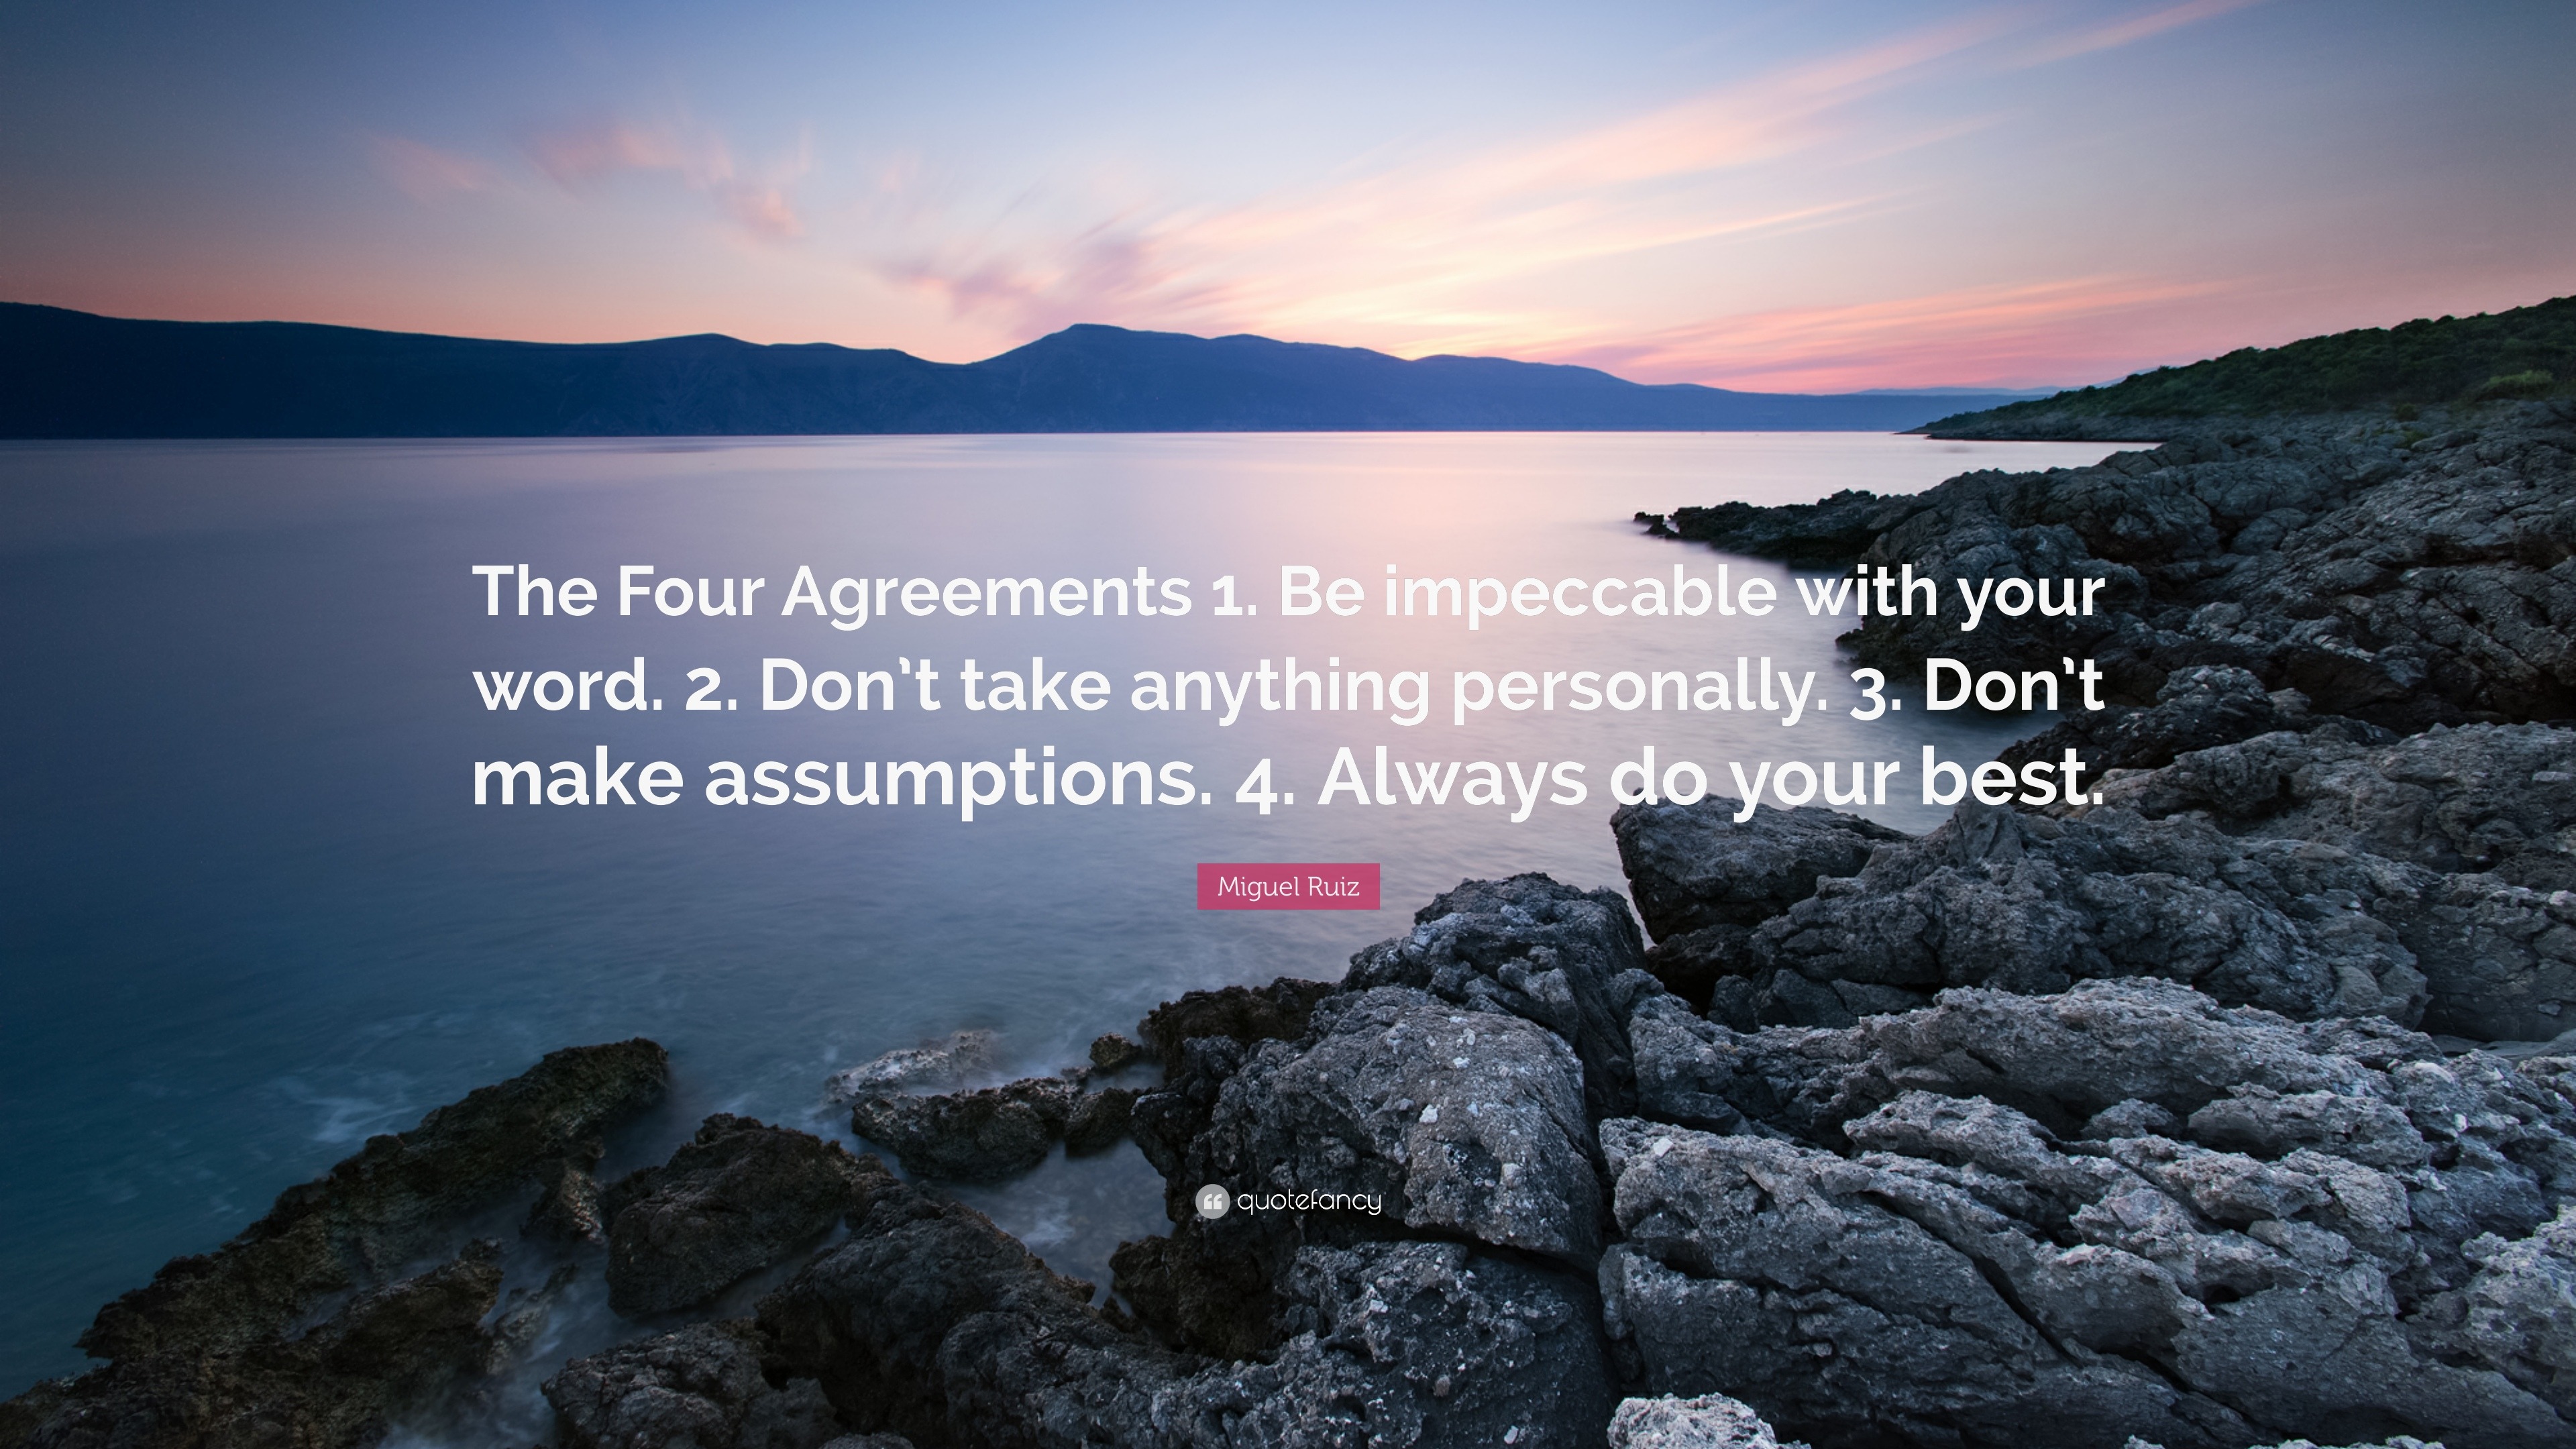 Miguel Ruiz Quote: “The Four Agreements 1. Be impeccable with your word. 2.  Don't take anything personally. 3. Don't make assumptions. 4. Al”